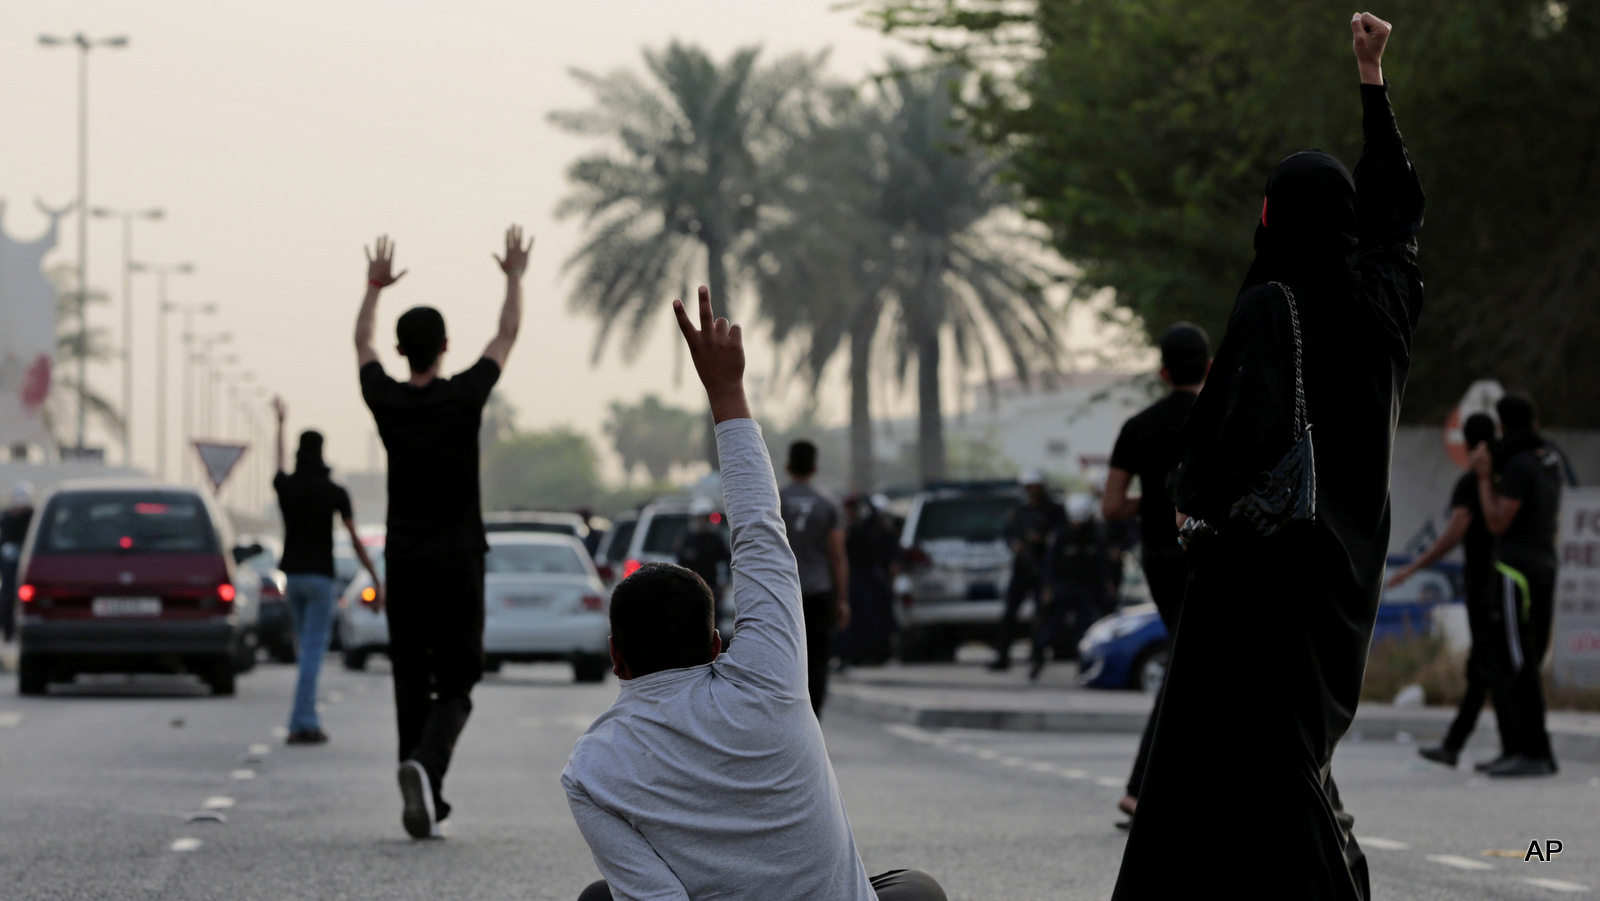 Bahraini Shiite Muslim protesters confront riot police blocking the path of their protest march during a demonstration denouncing a suicide bombing at a Shiite mosque in Saudi Arabia, in Daih, Bahrain, Saturday, May 23, 2015. The unauthorized protest was dispersed by riot police firing tear gas and birdshot. The Islamic State group claimed responsibility for the Saudi mosque bombing that killed and wounded many people. 